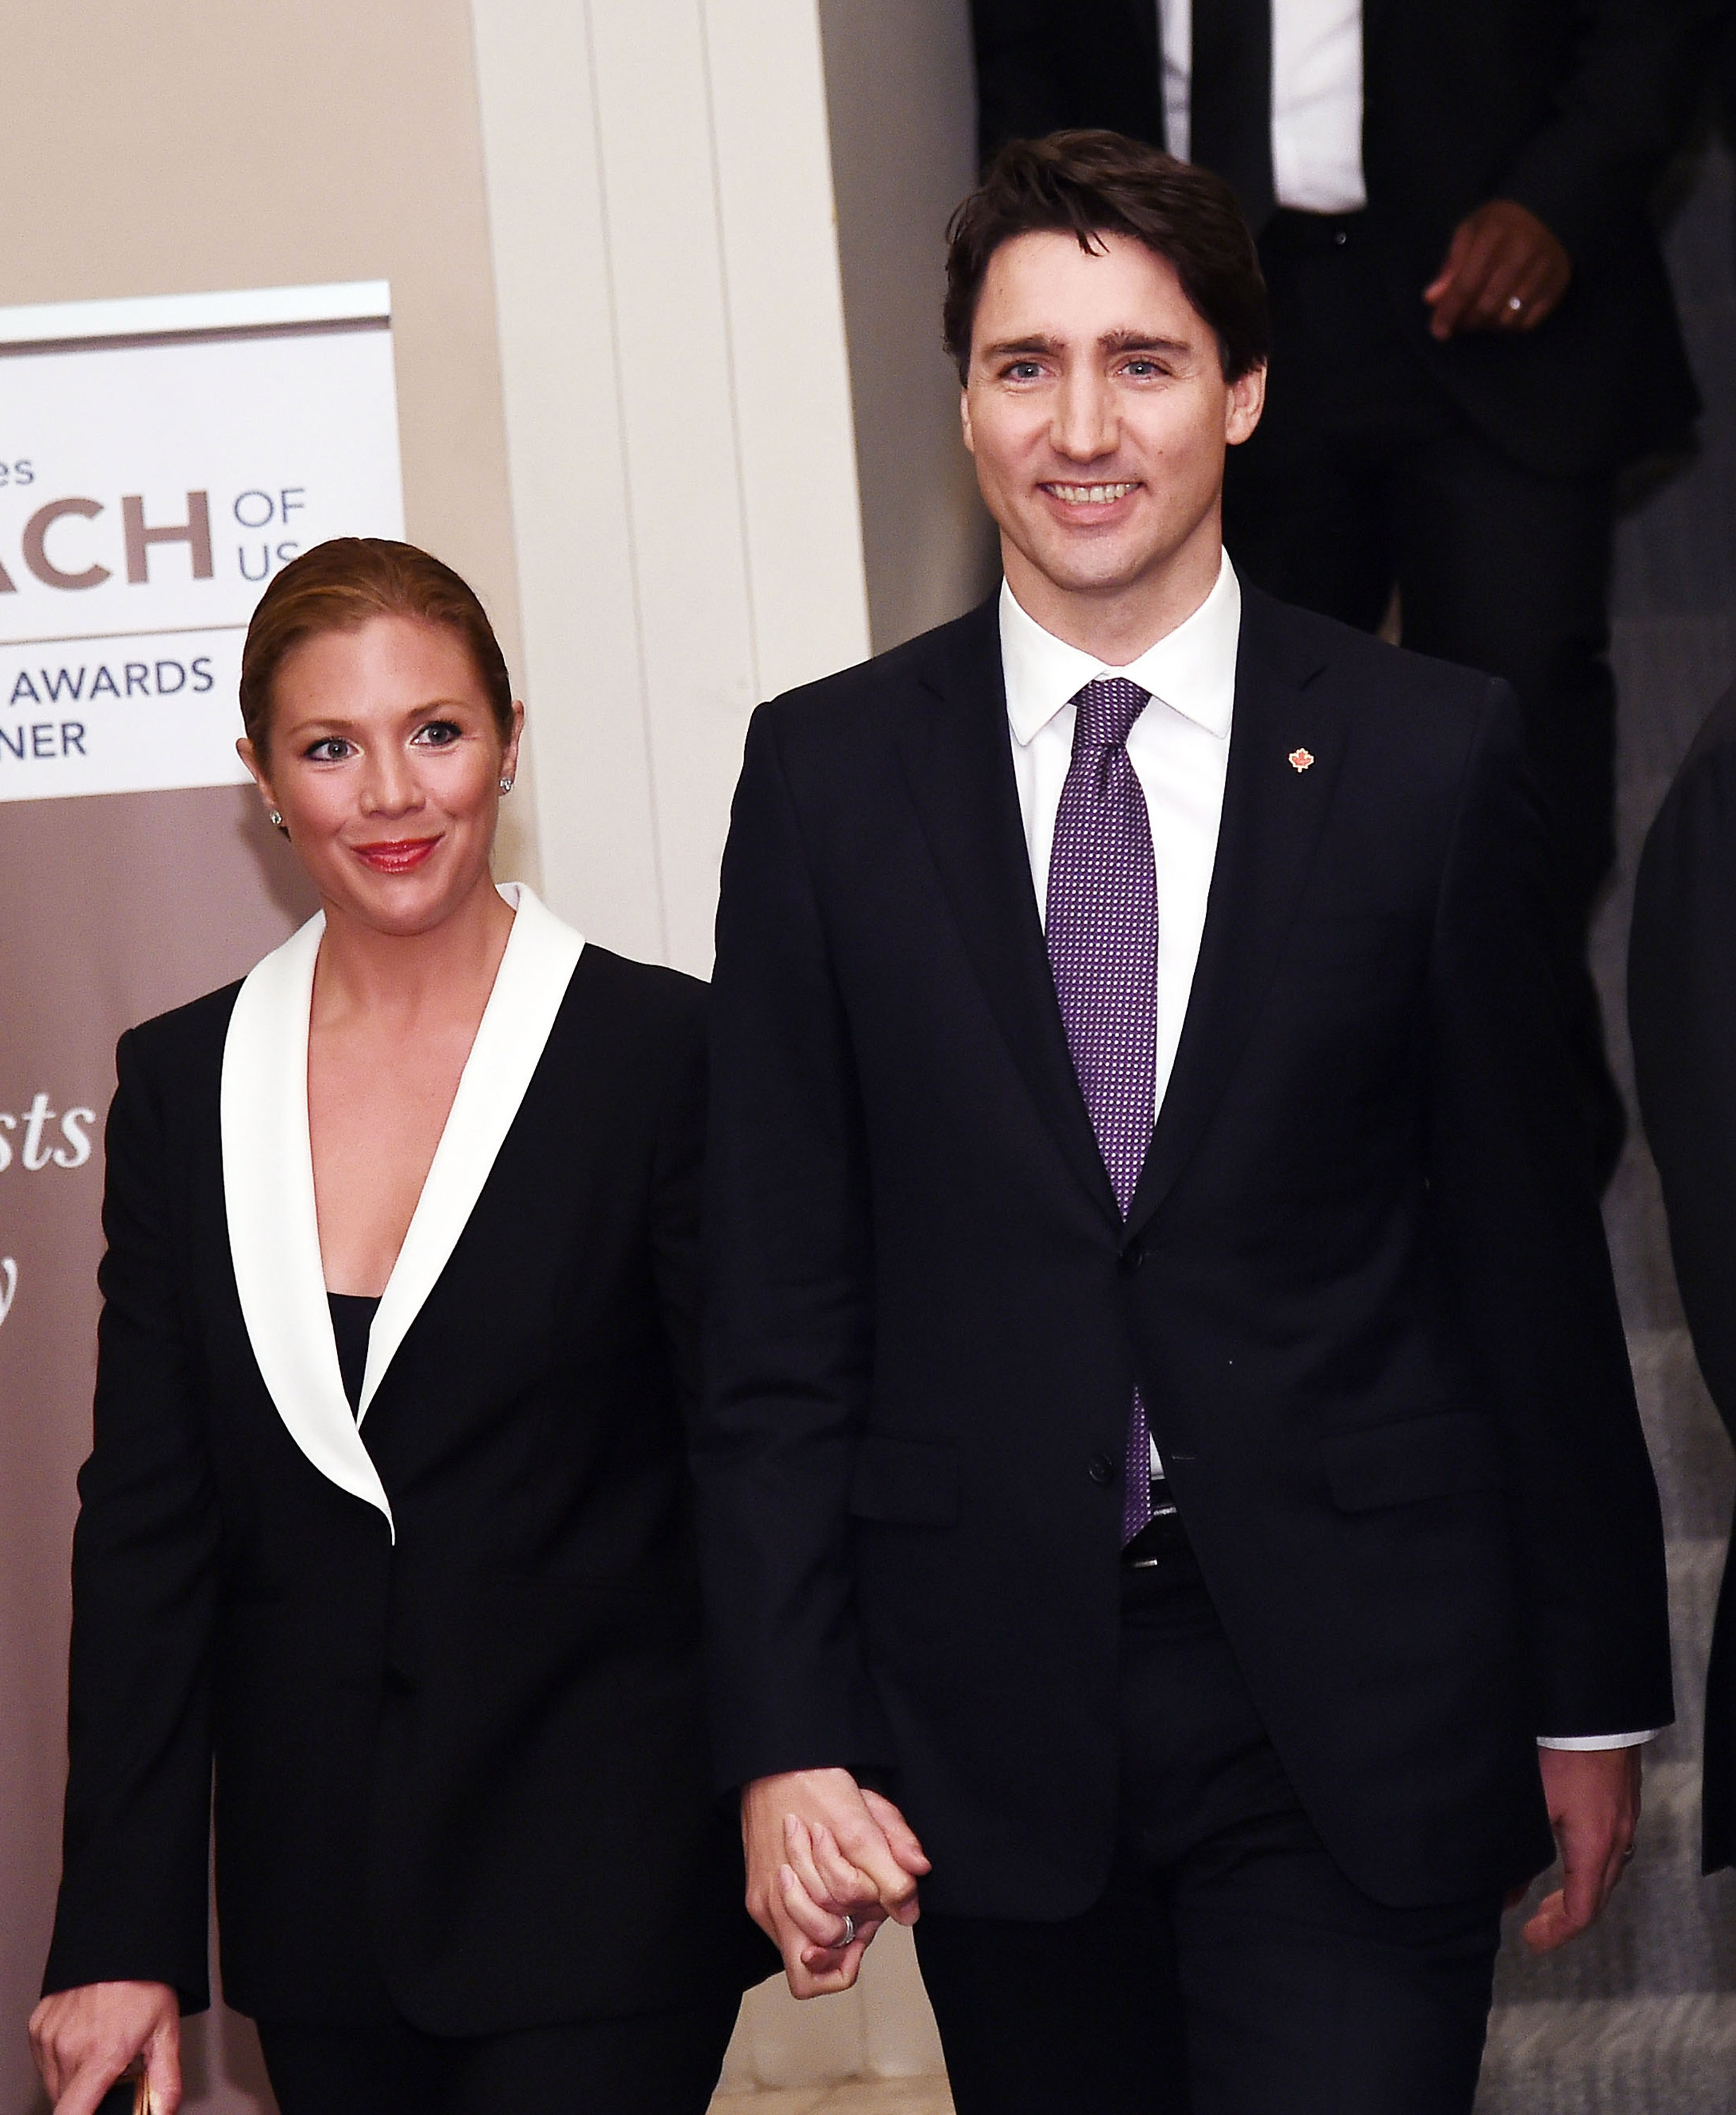 Canadian Prime Minister Justin Trudeau Honored At Catalyst Awards Dinner